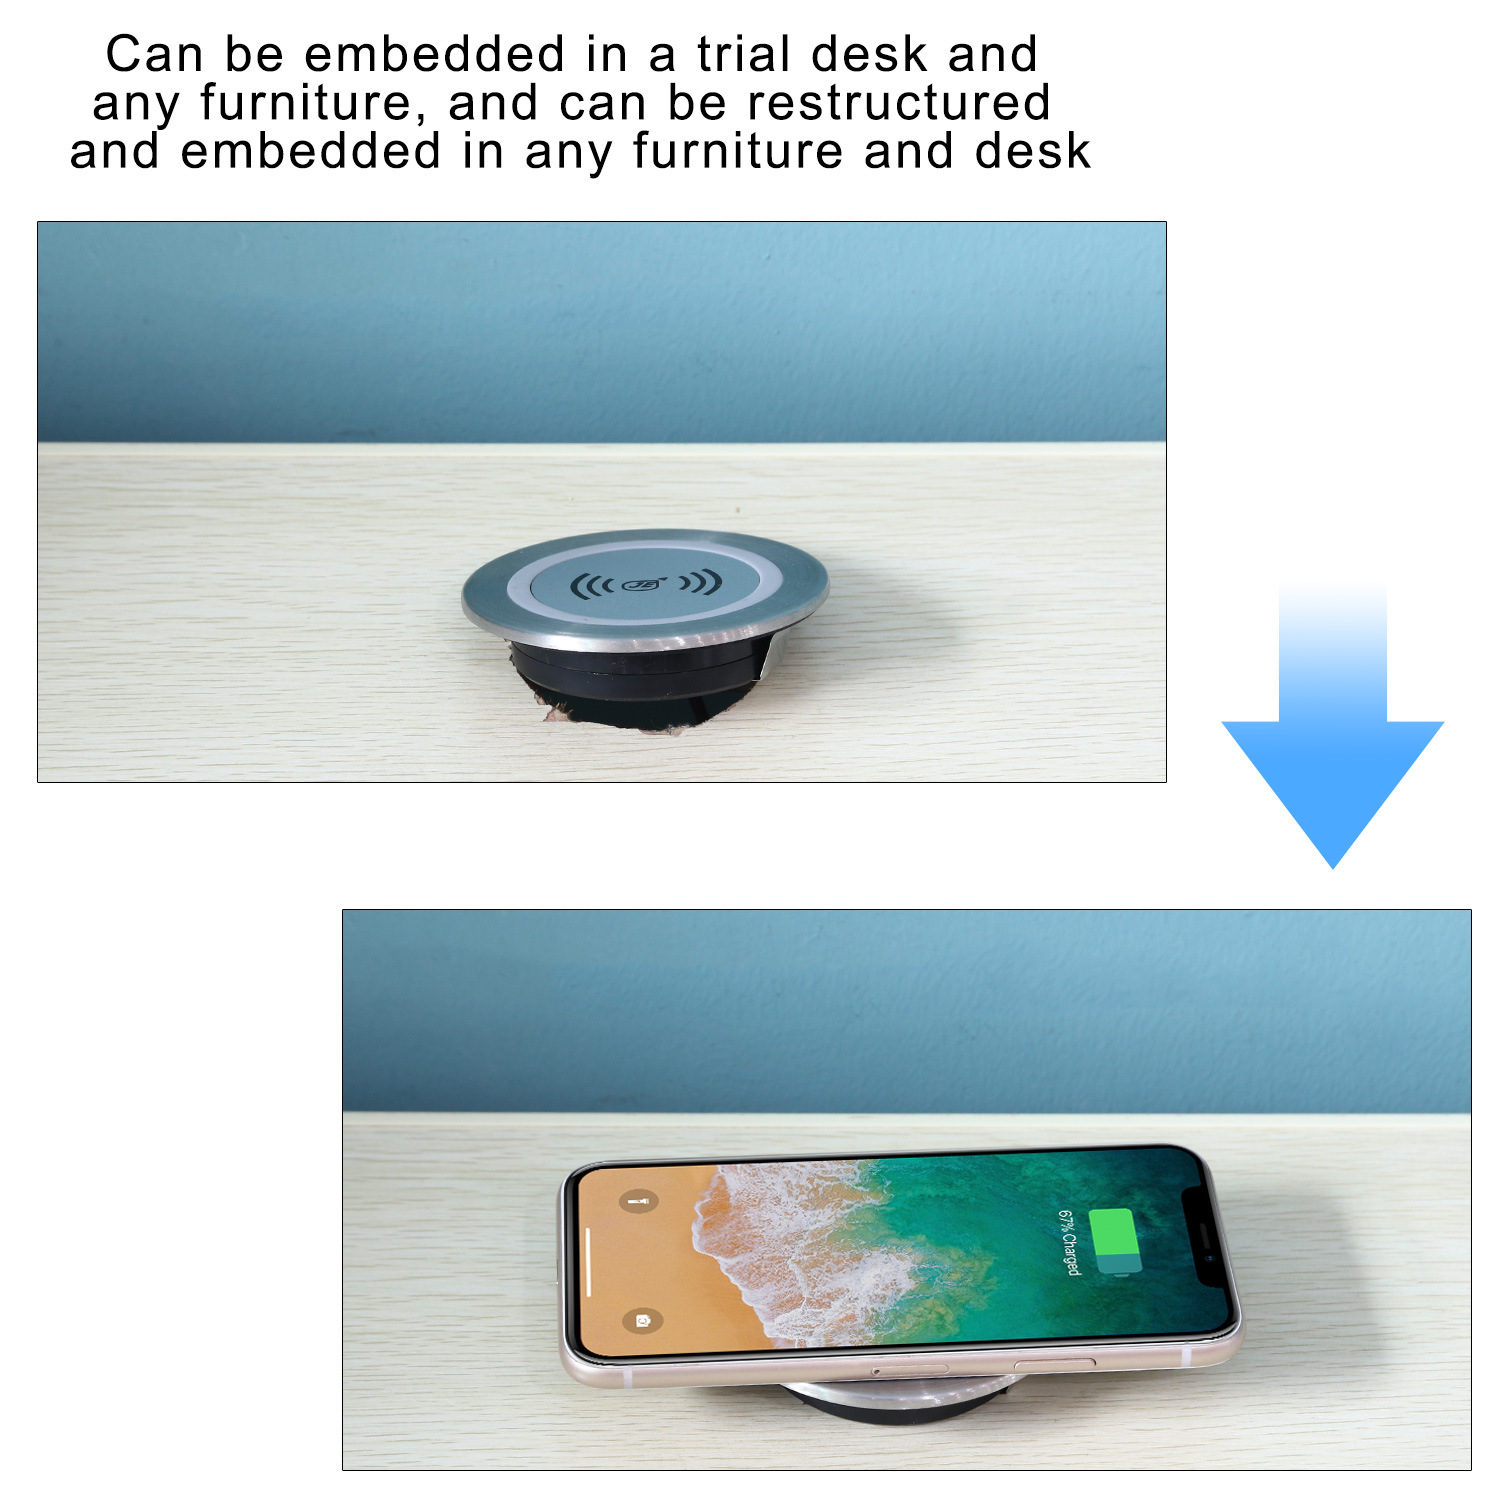 Bakeey 15W Waterproof Embedded Desktop Fast Charging Wireless Charger For iPhone XS 11Pro XMax Huawei P30 Pro Mate30 5G Mi10 K30 Poco X2 S20 5G